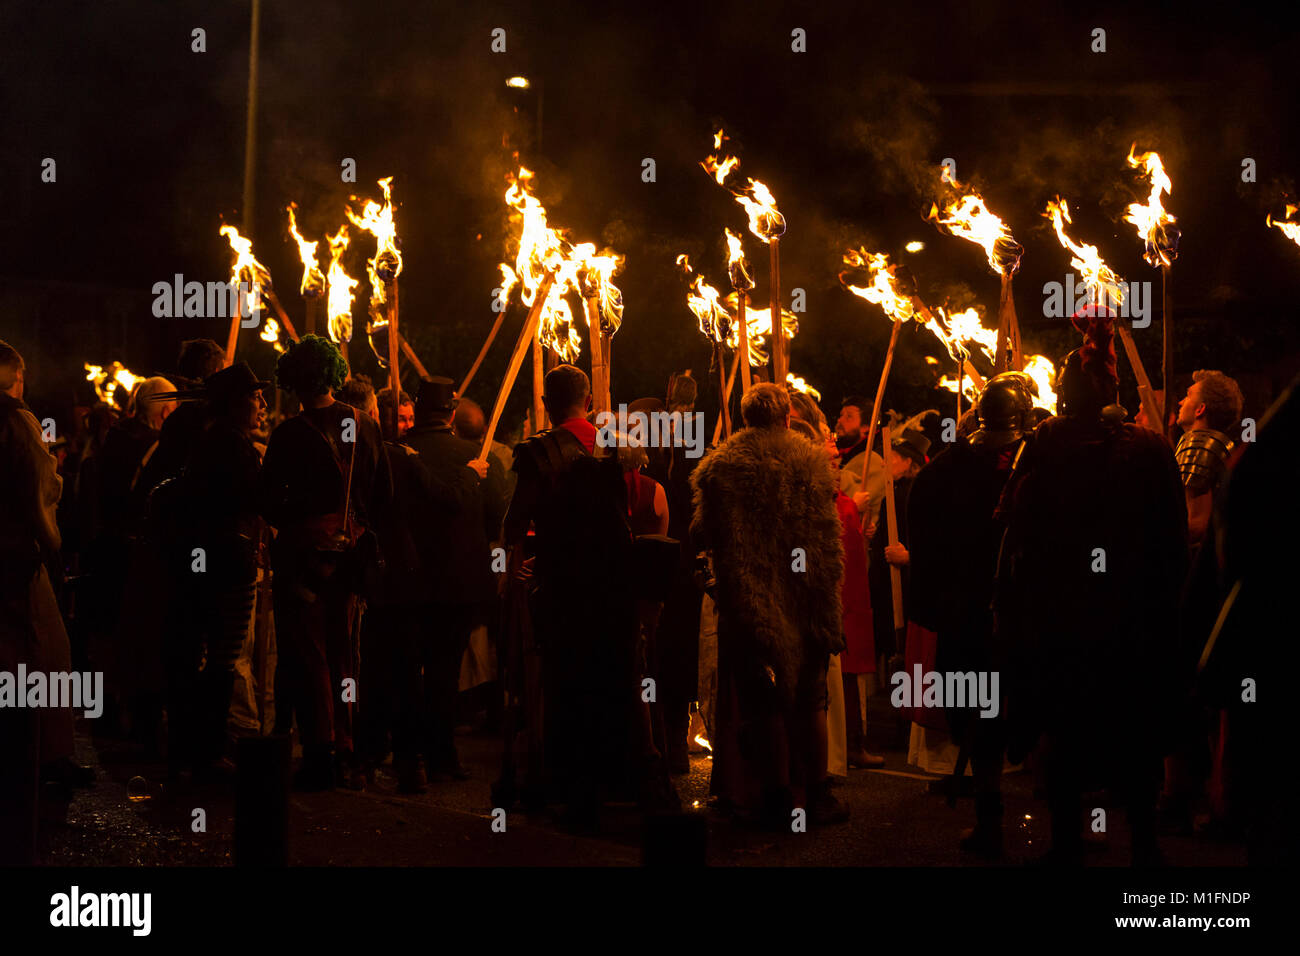 The Festival of the Flower Torches, a traditional Easter parade